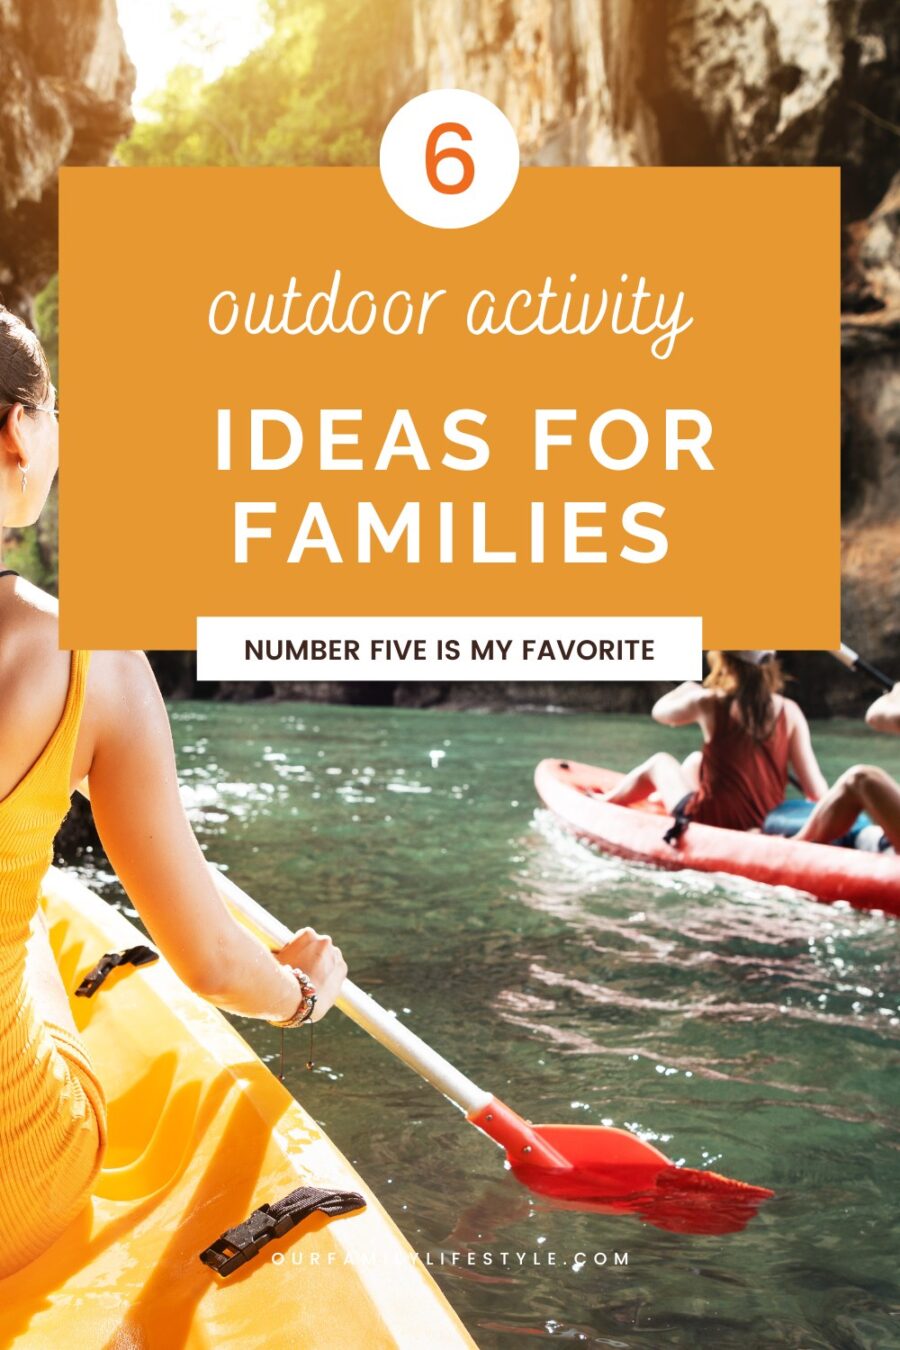 6 Outdoor Activity Ideas for Families